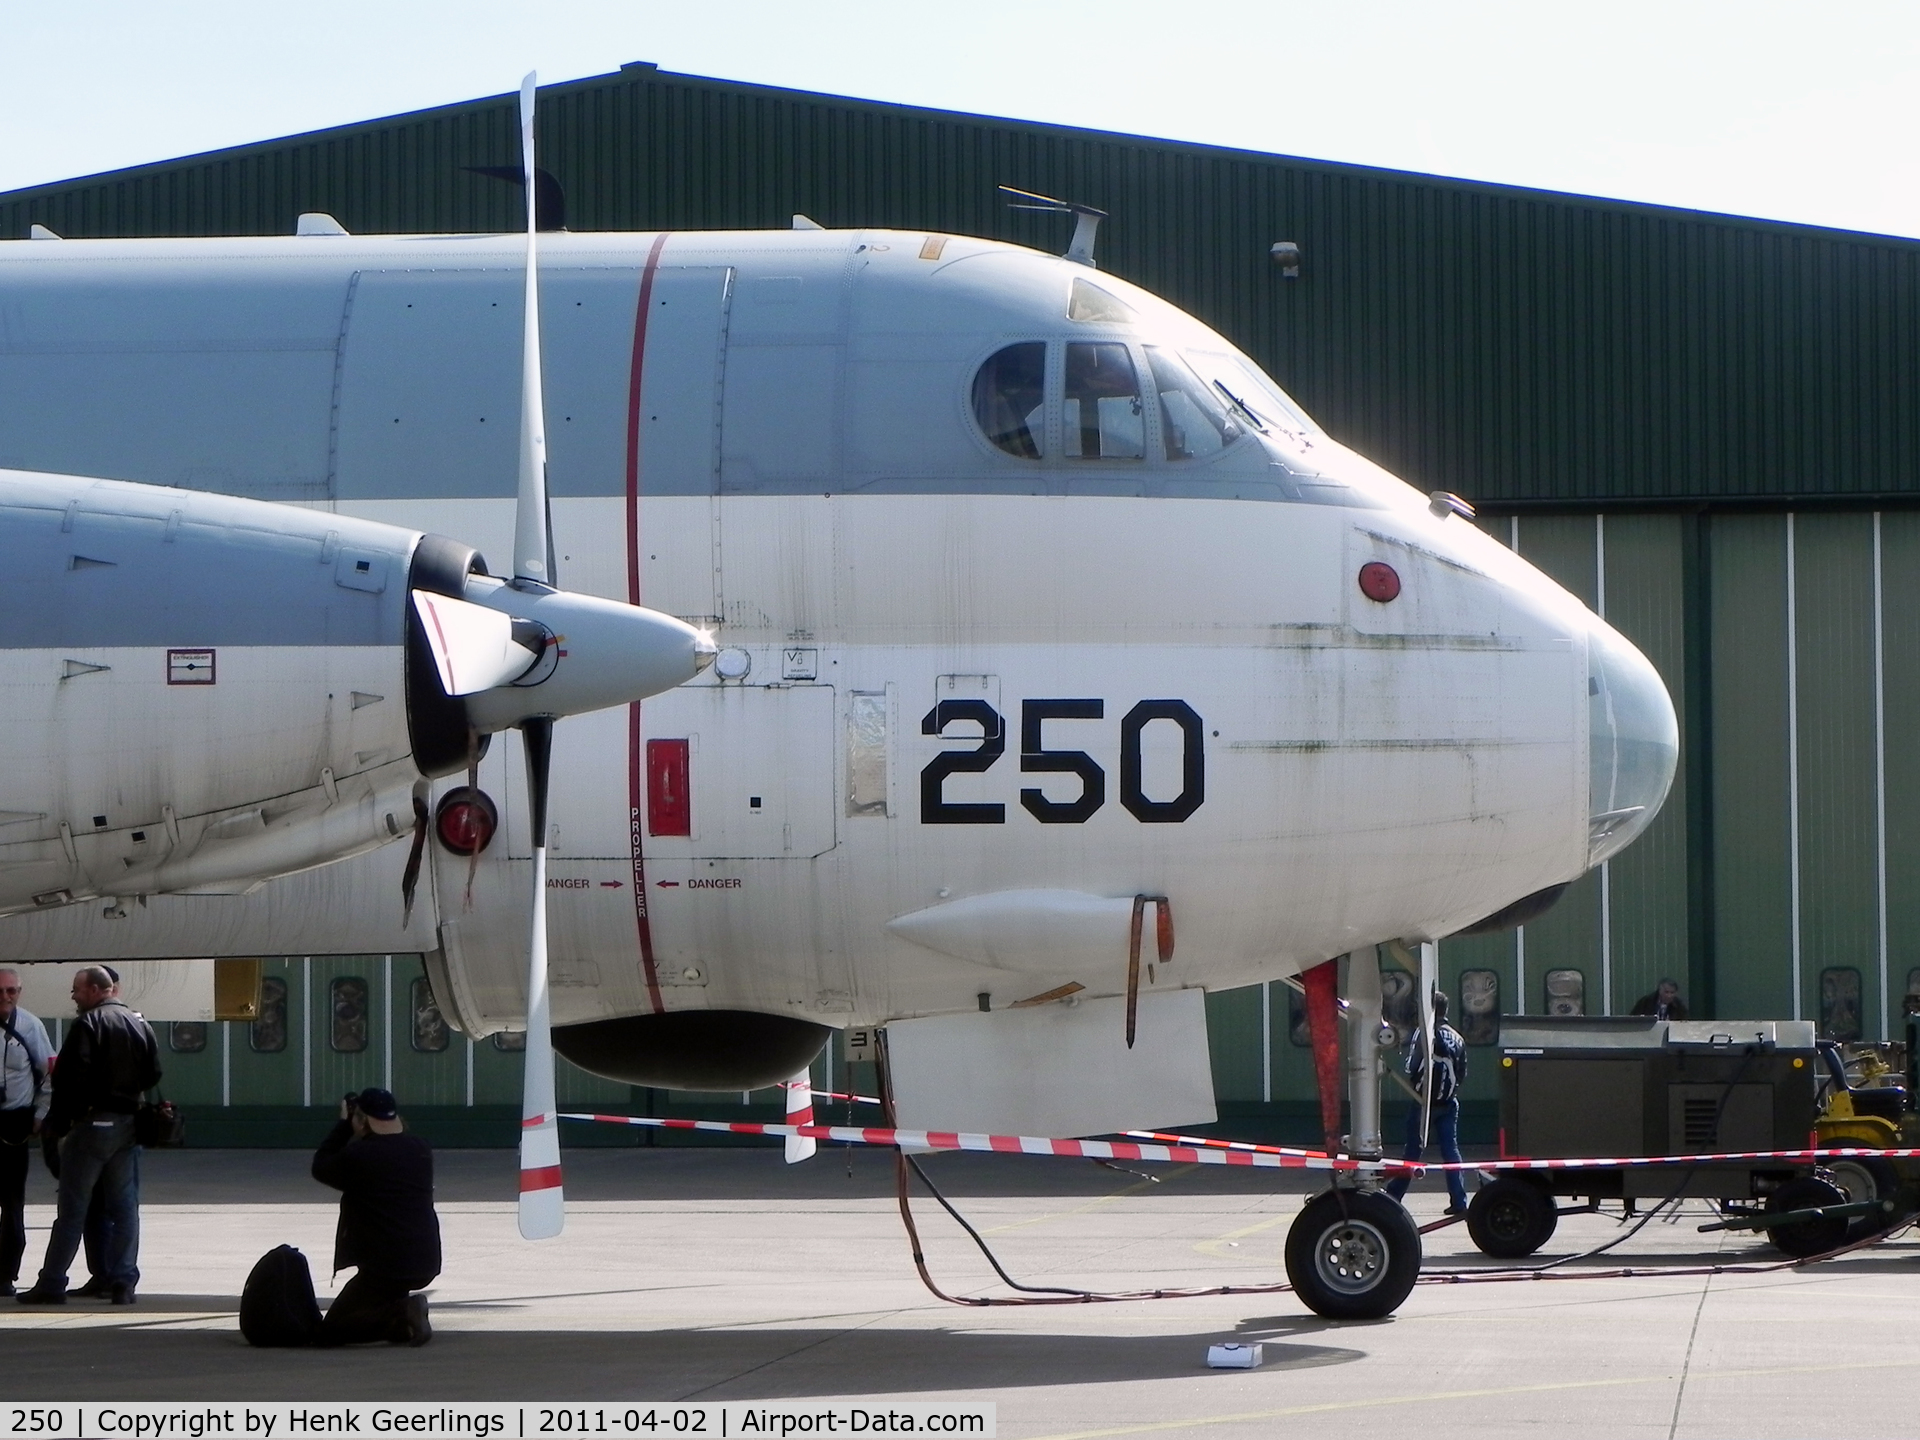 250, Breguet SP-13A Atlantic C/N 55, Royal Dutch Navy.
Was based at Valkenburg now in the Aviation Museum at Soesterberg